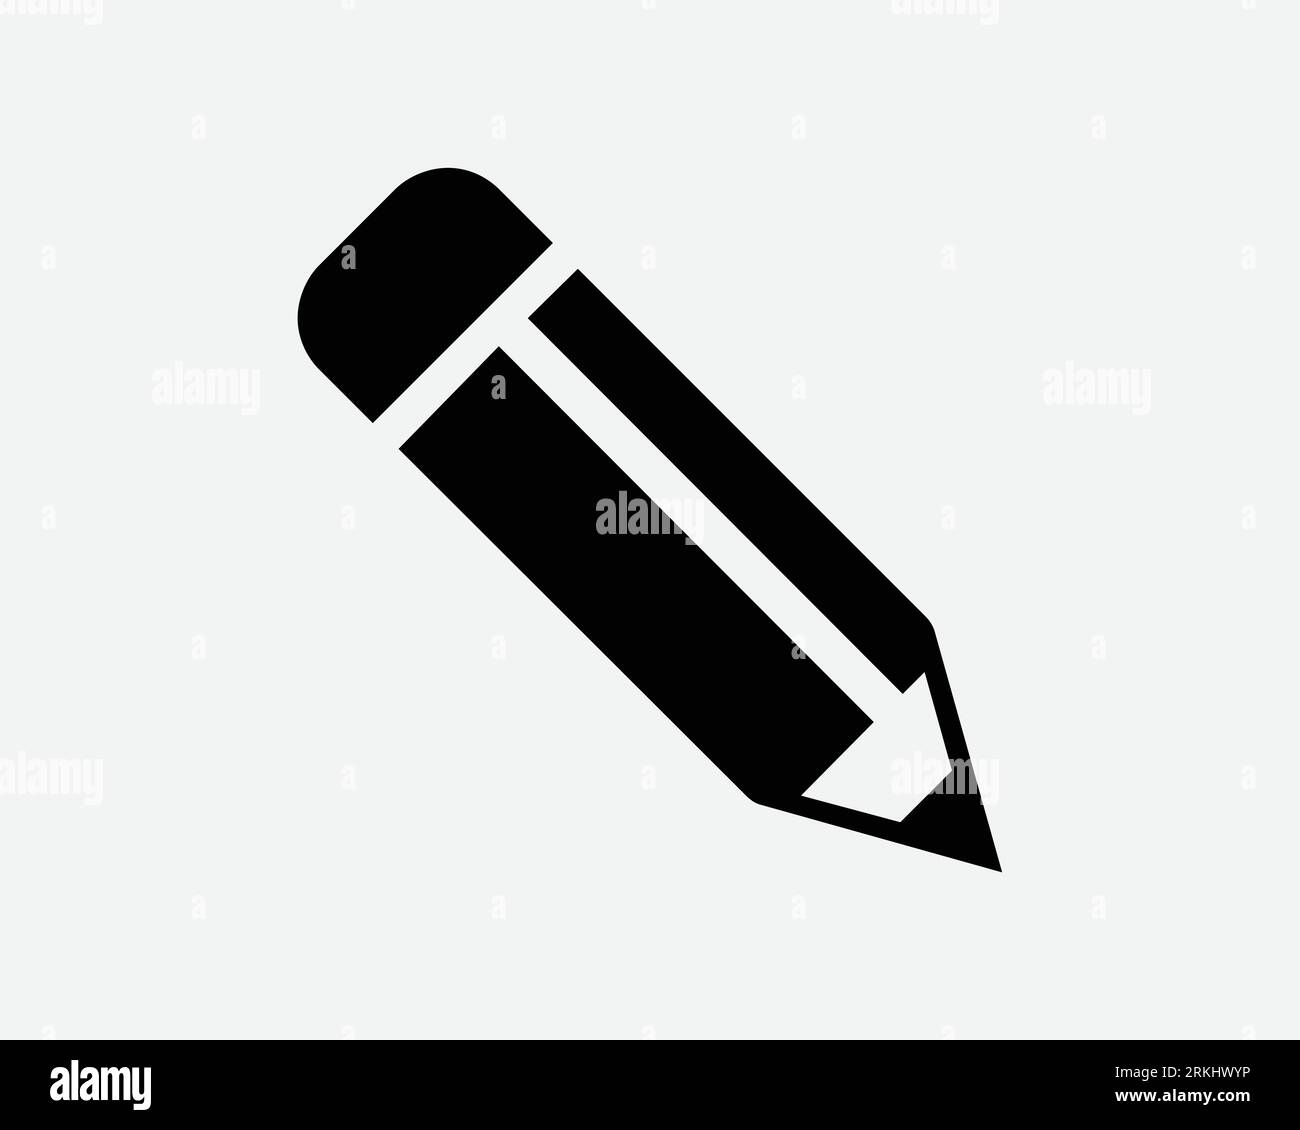 Edit Pencil Icon Pen Editor Write Draw Writing Drawing Editing Stationery Office School Work Study Art Black White Outline Shape Vector Sign Symbol Stock Vector